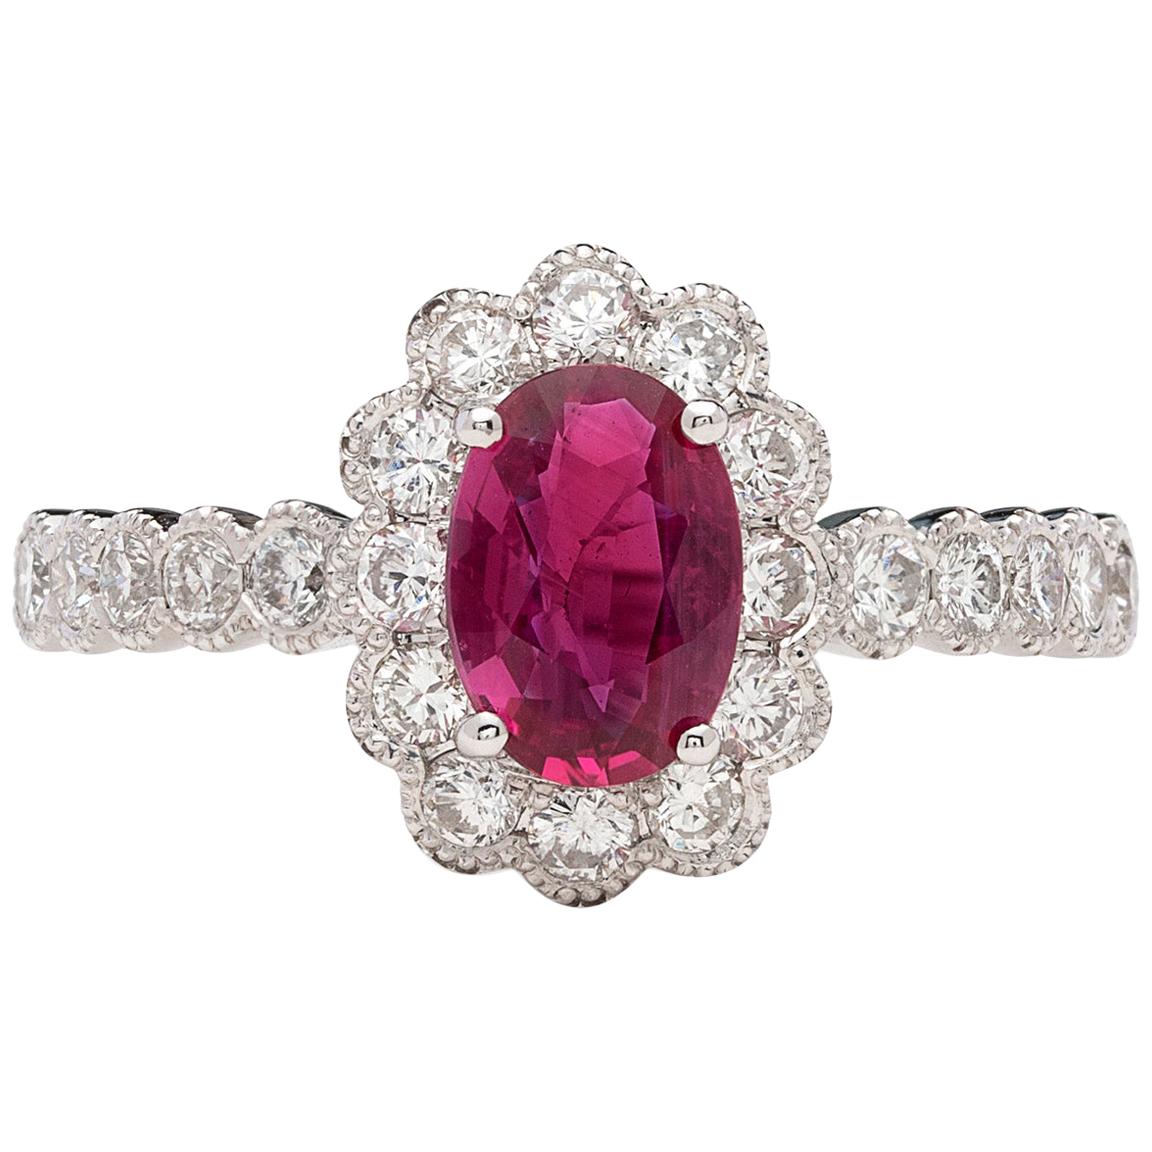 GIA 1.04 Carat Unheated Ruby Diamond Ring For Sale